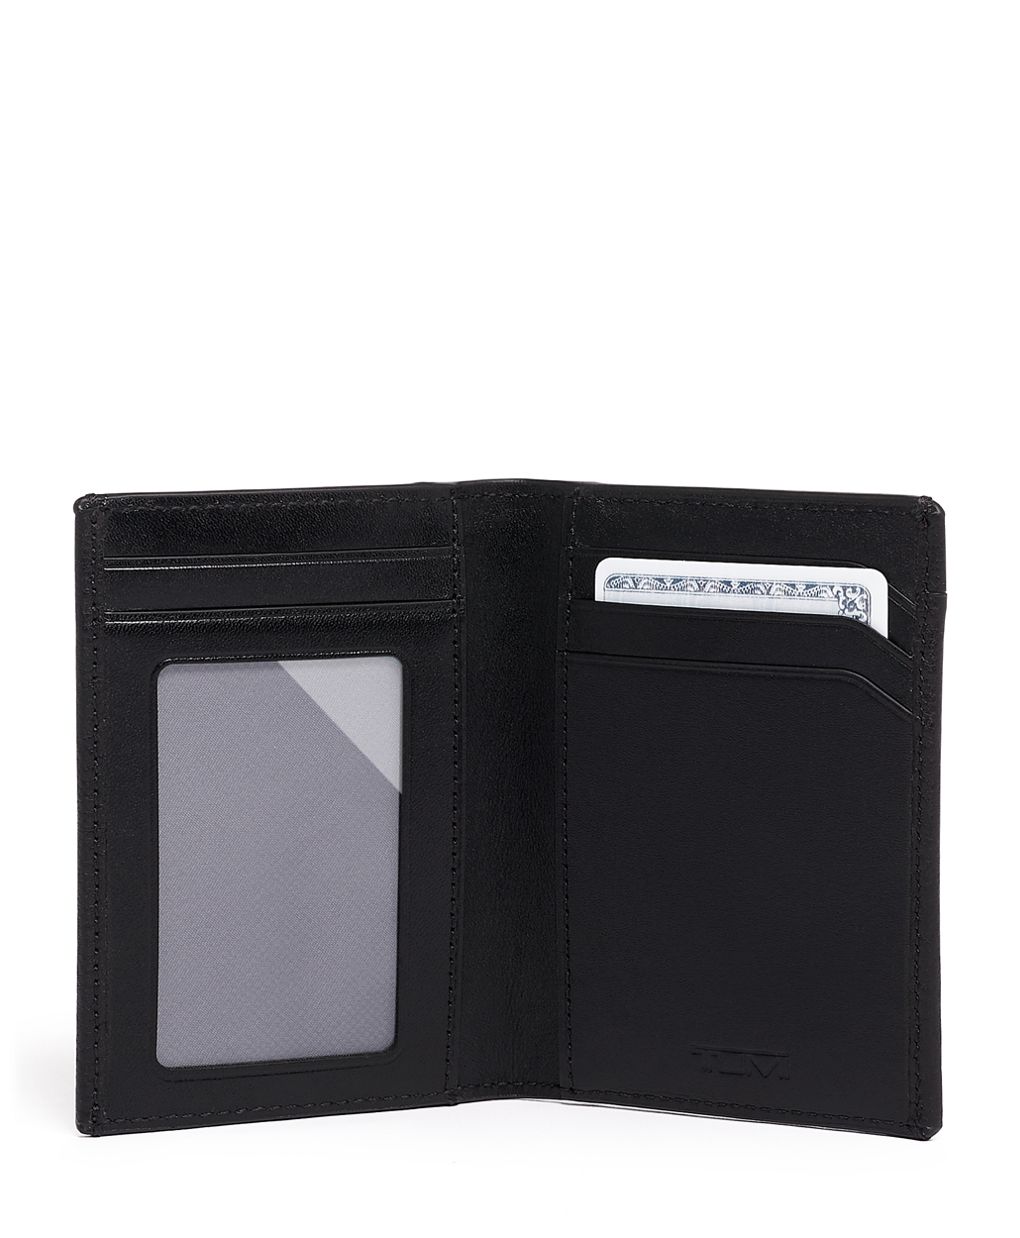 Best Selling Double ID Window Card Holder and Leather Wallets for Men